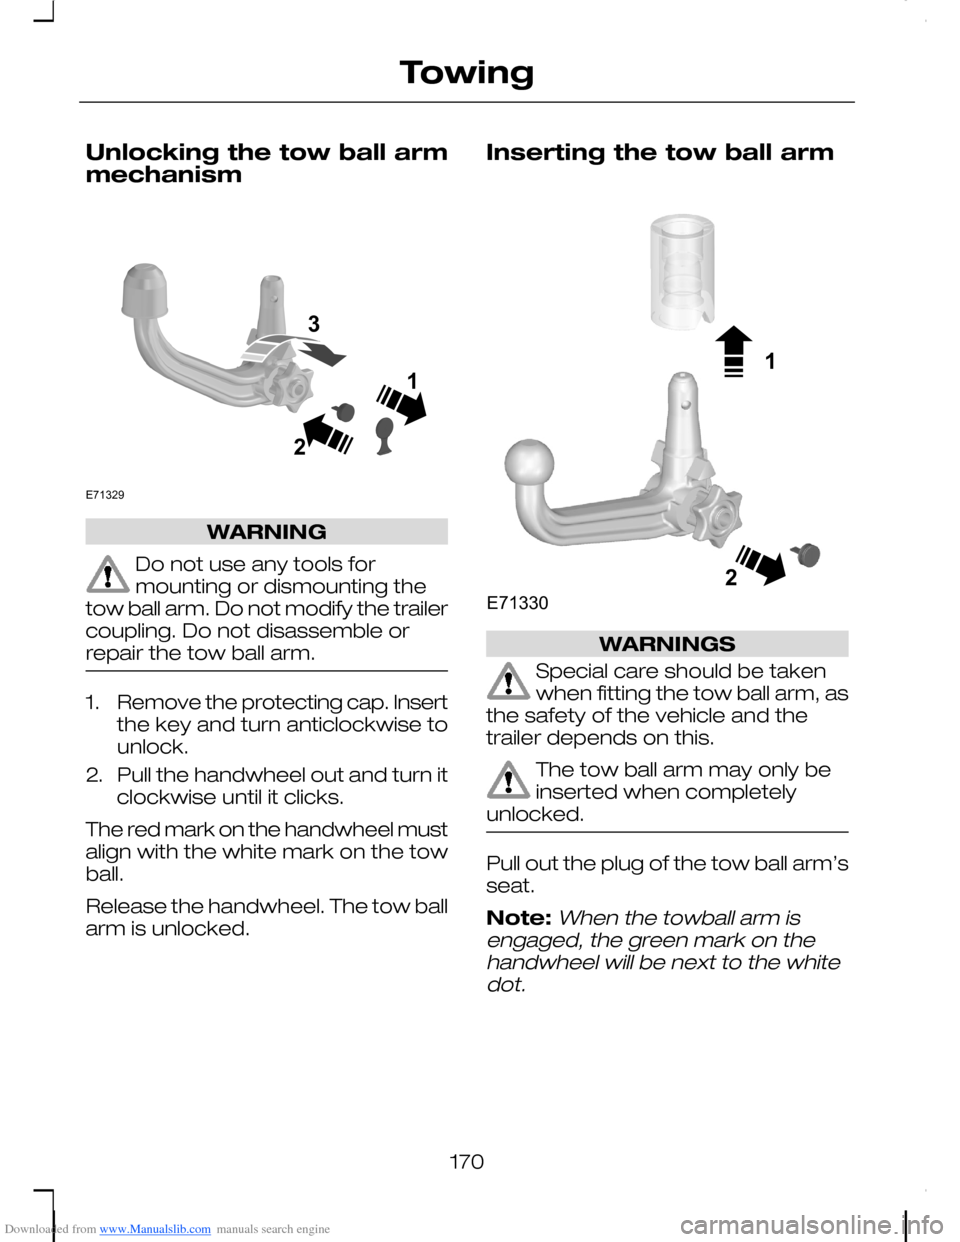 FORD C MAX 2008 1.G Owners Manual Downloaded from www.Manualslib.com manuals search engine Unlocking the tow ball armmechanism
WARNING
Do not use any tools formounting or dismounting thetow ball arm. Do not modify the trailercoupling.